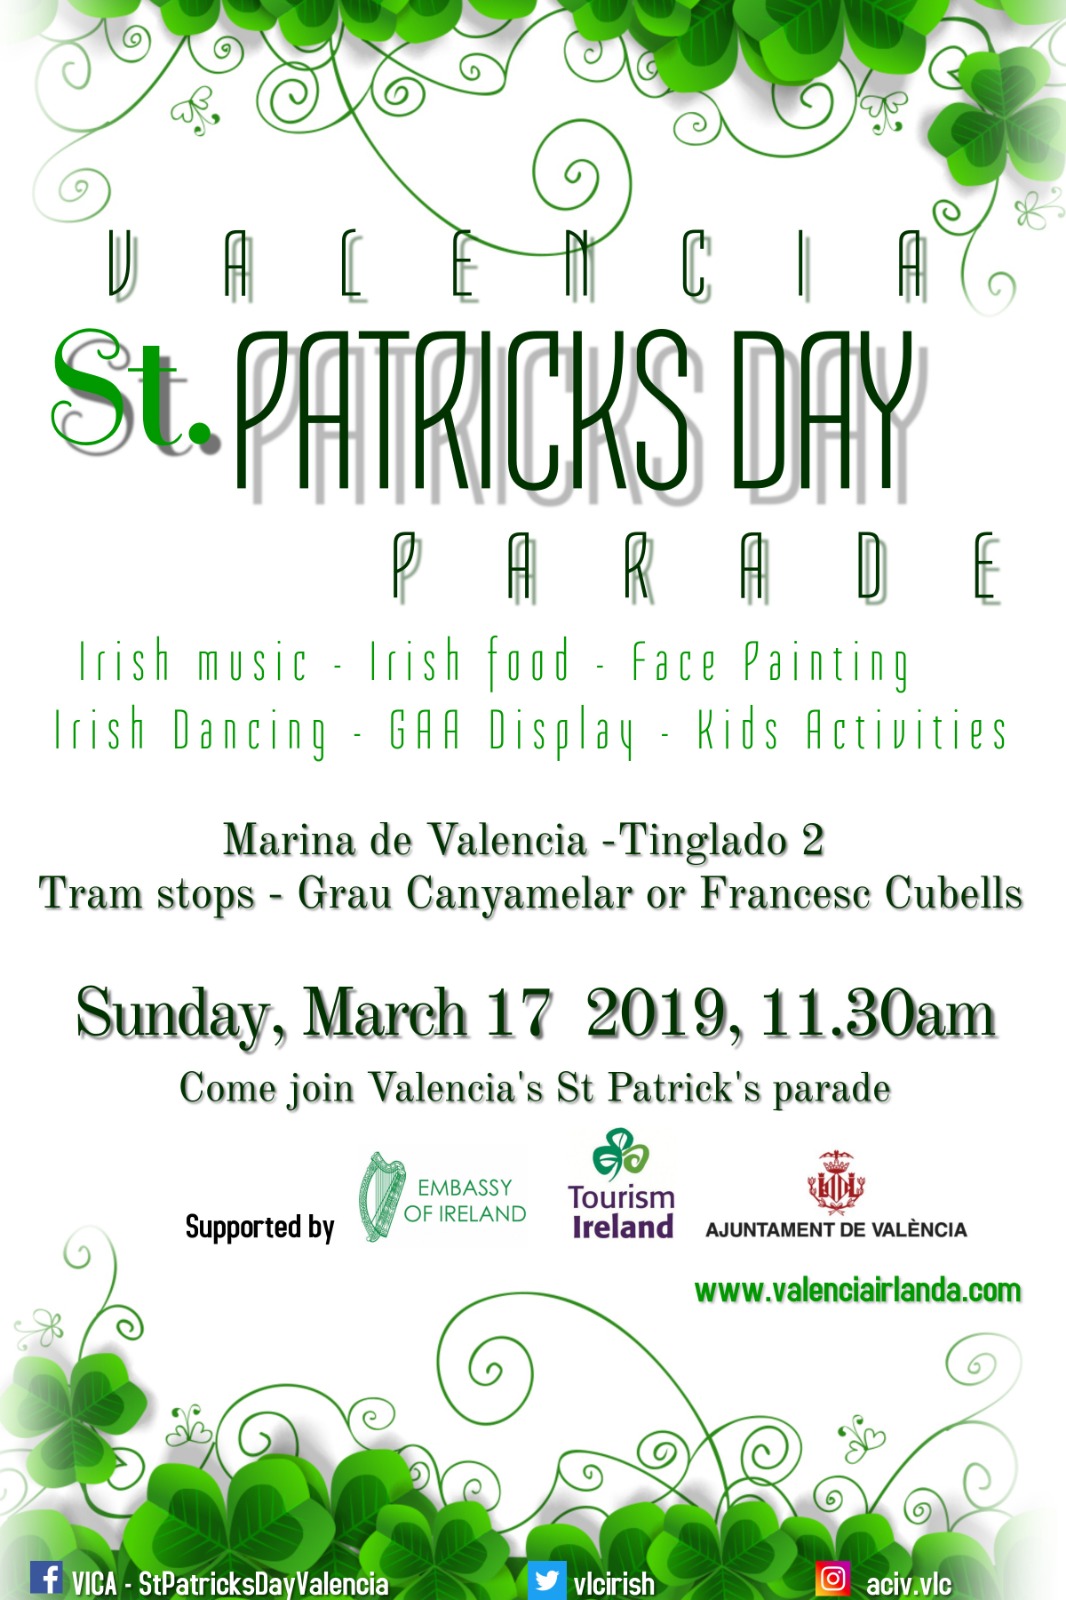 St. Patrick's Day 2019 poster